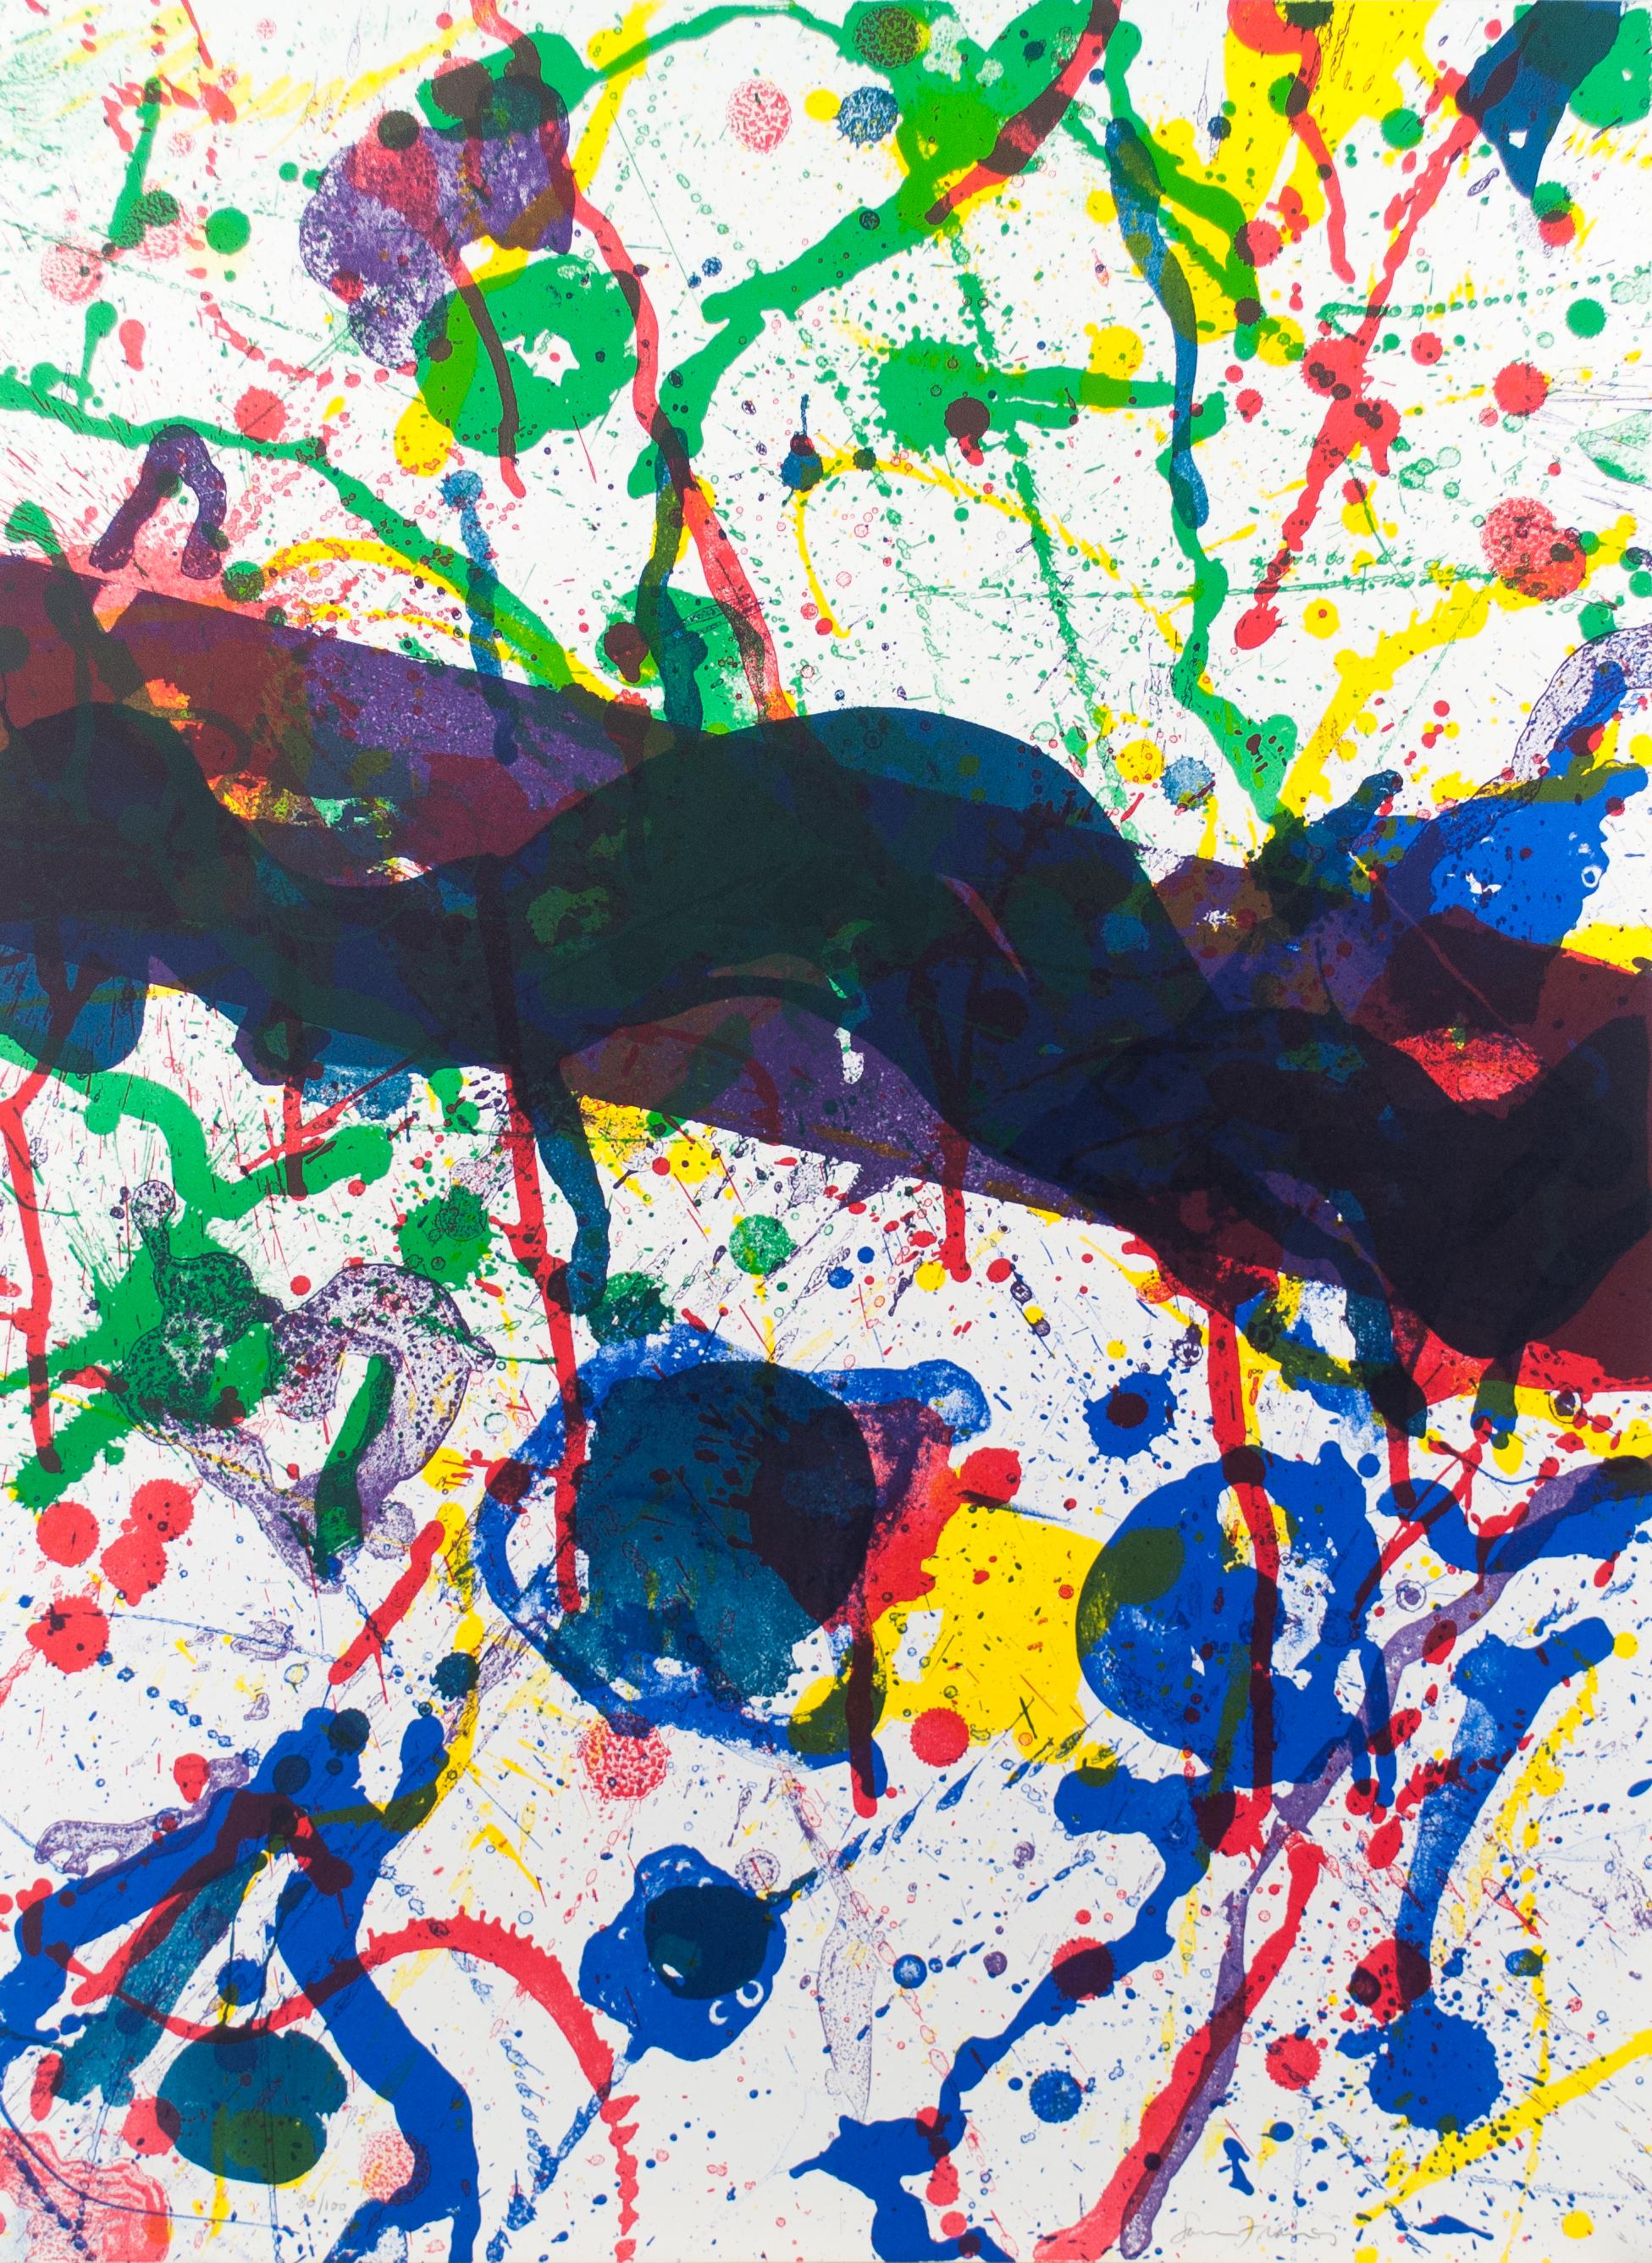 Sam Francis Abstract Print - Untitled from the portfolio “Poems dans le ciel”